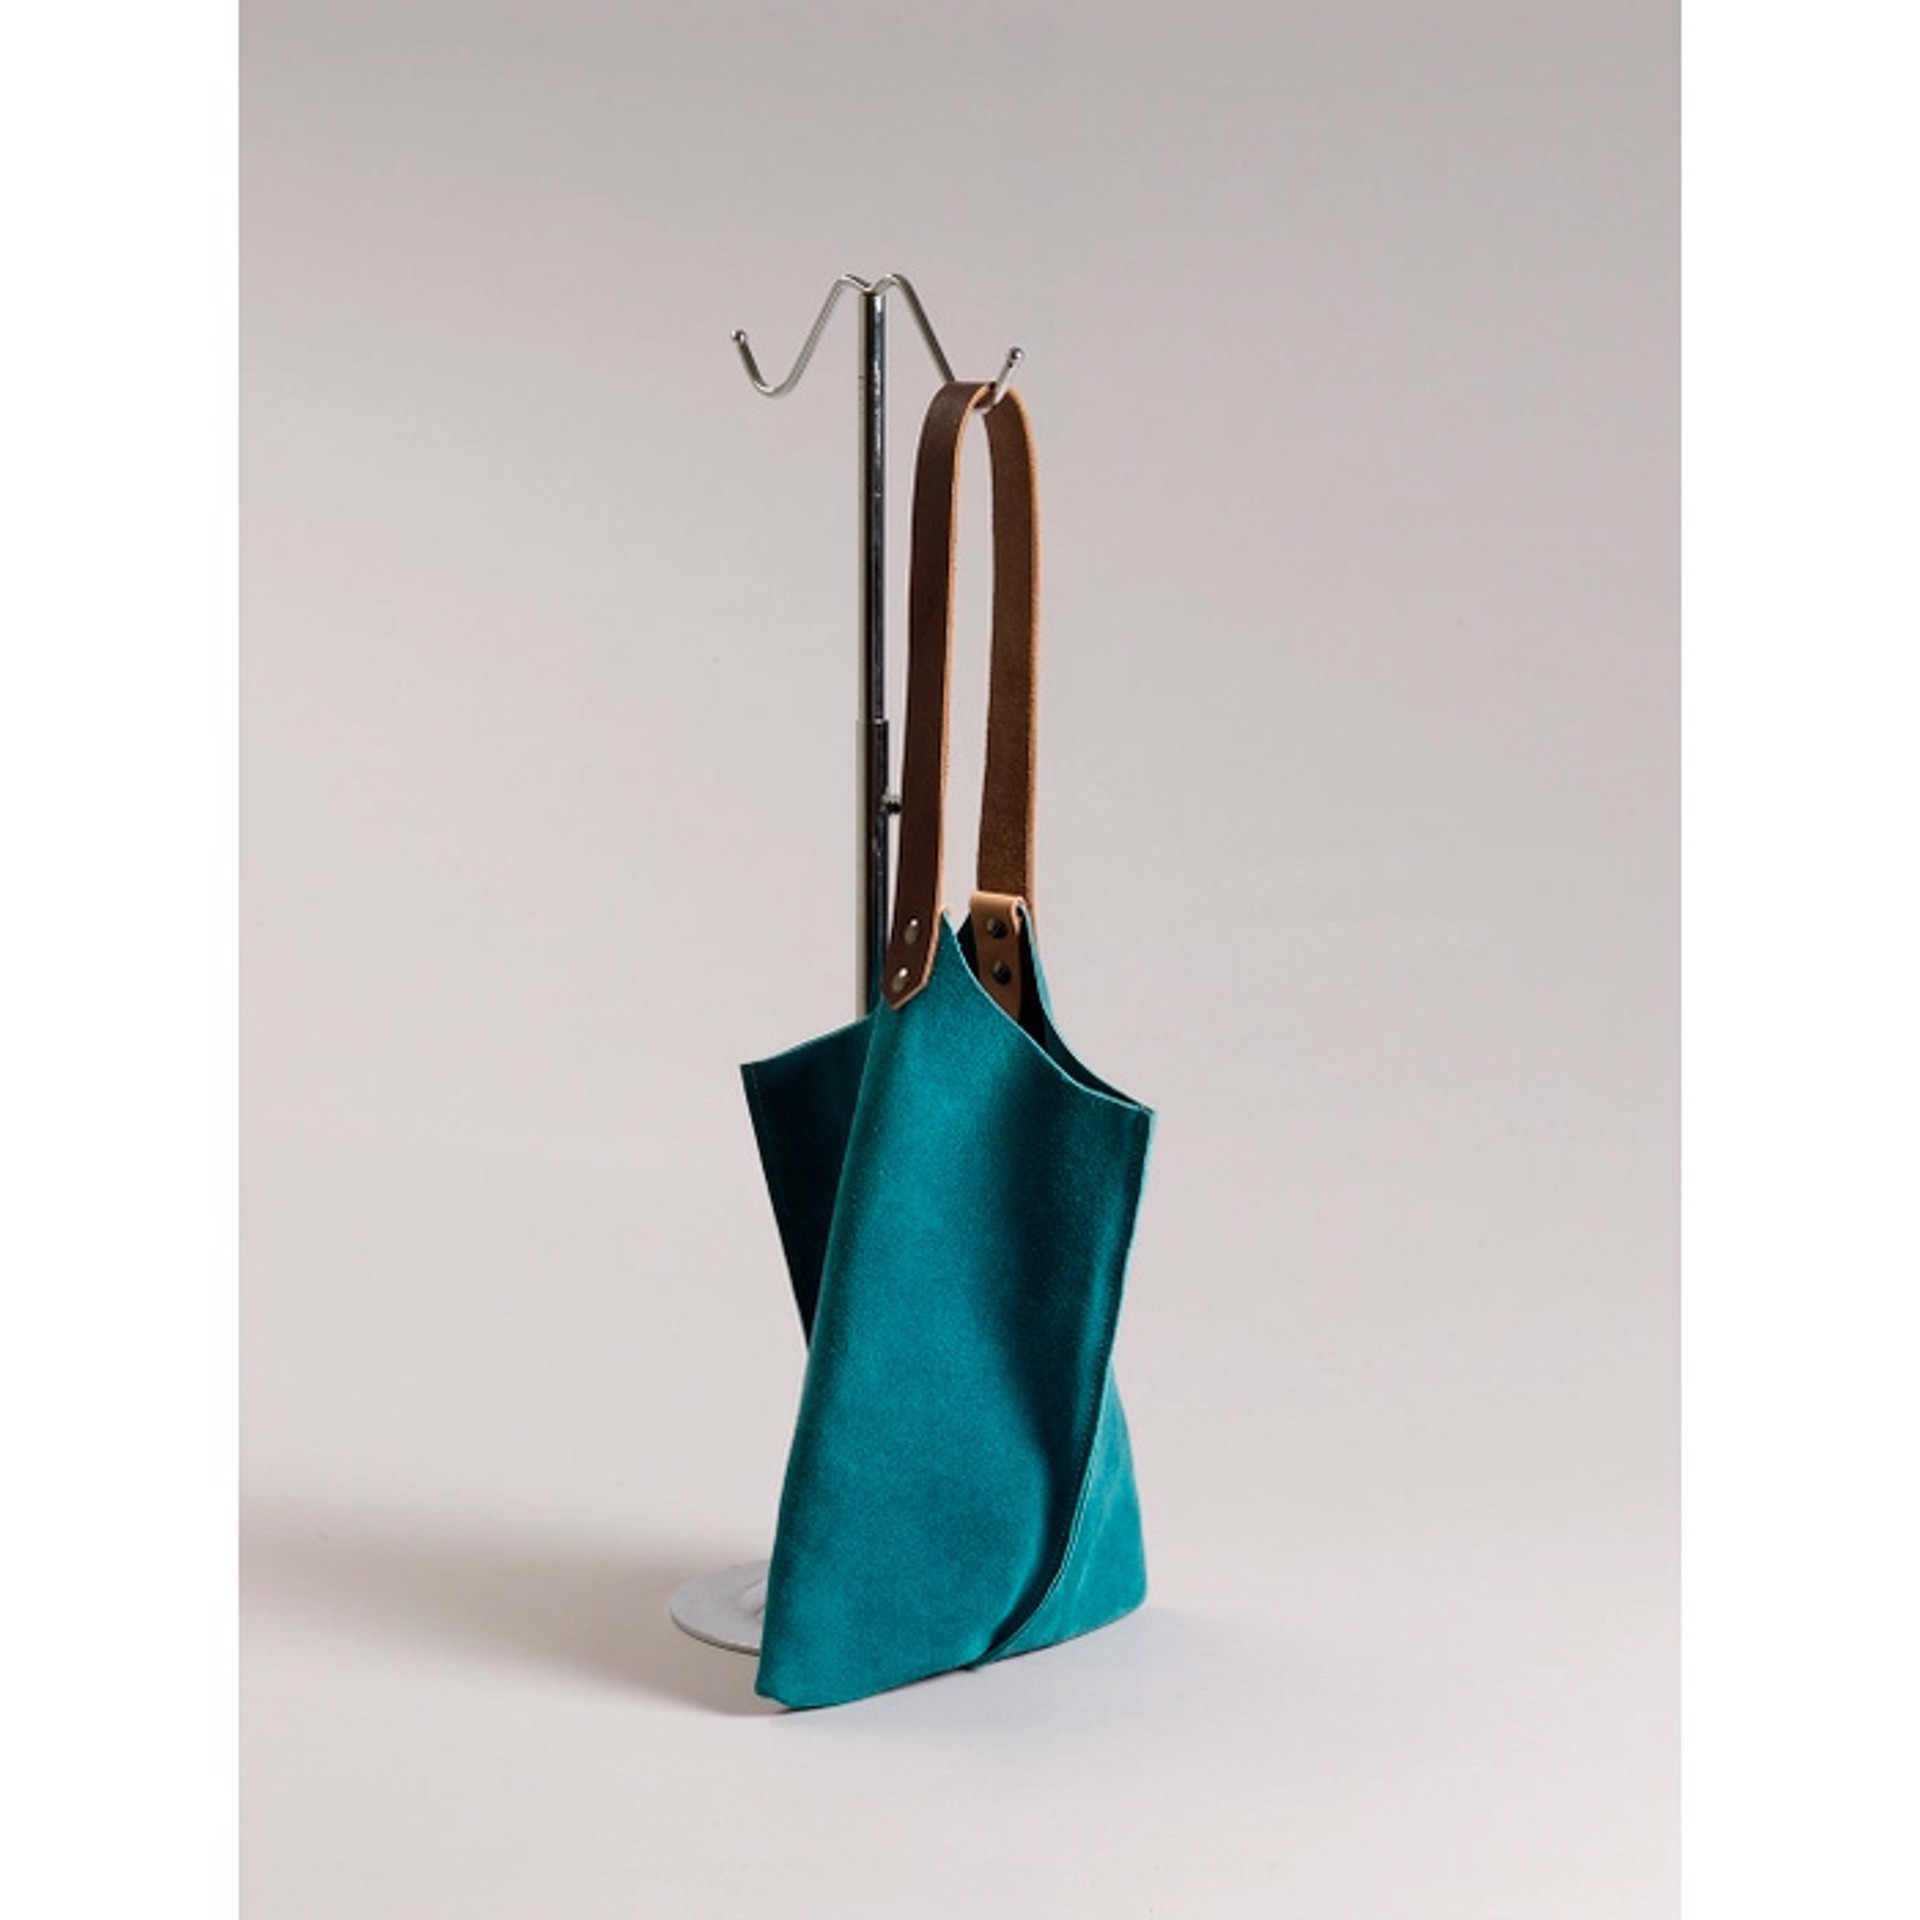 Turquoise Suede Leather Tote by Scabby Robot